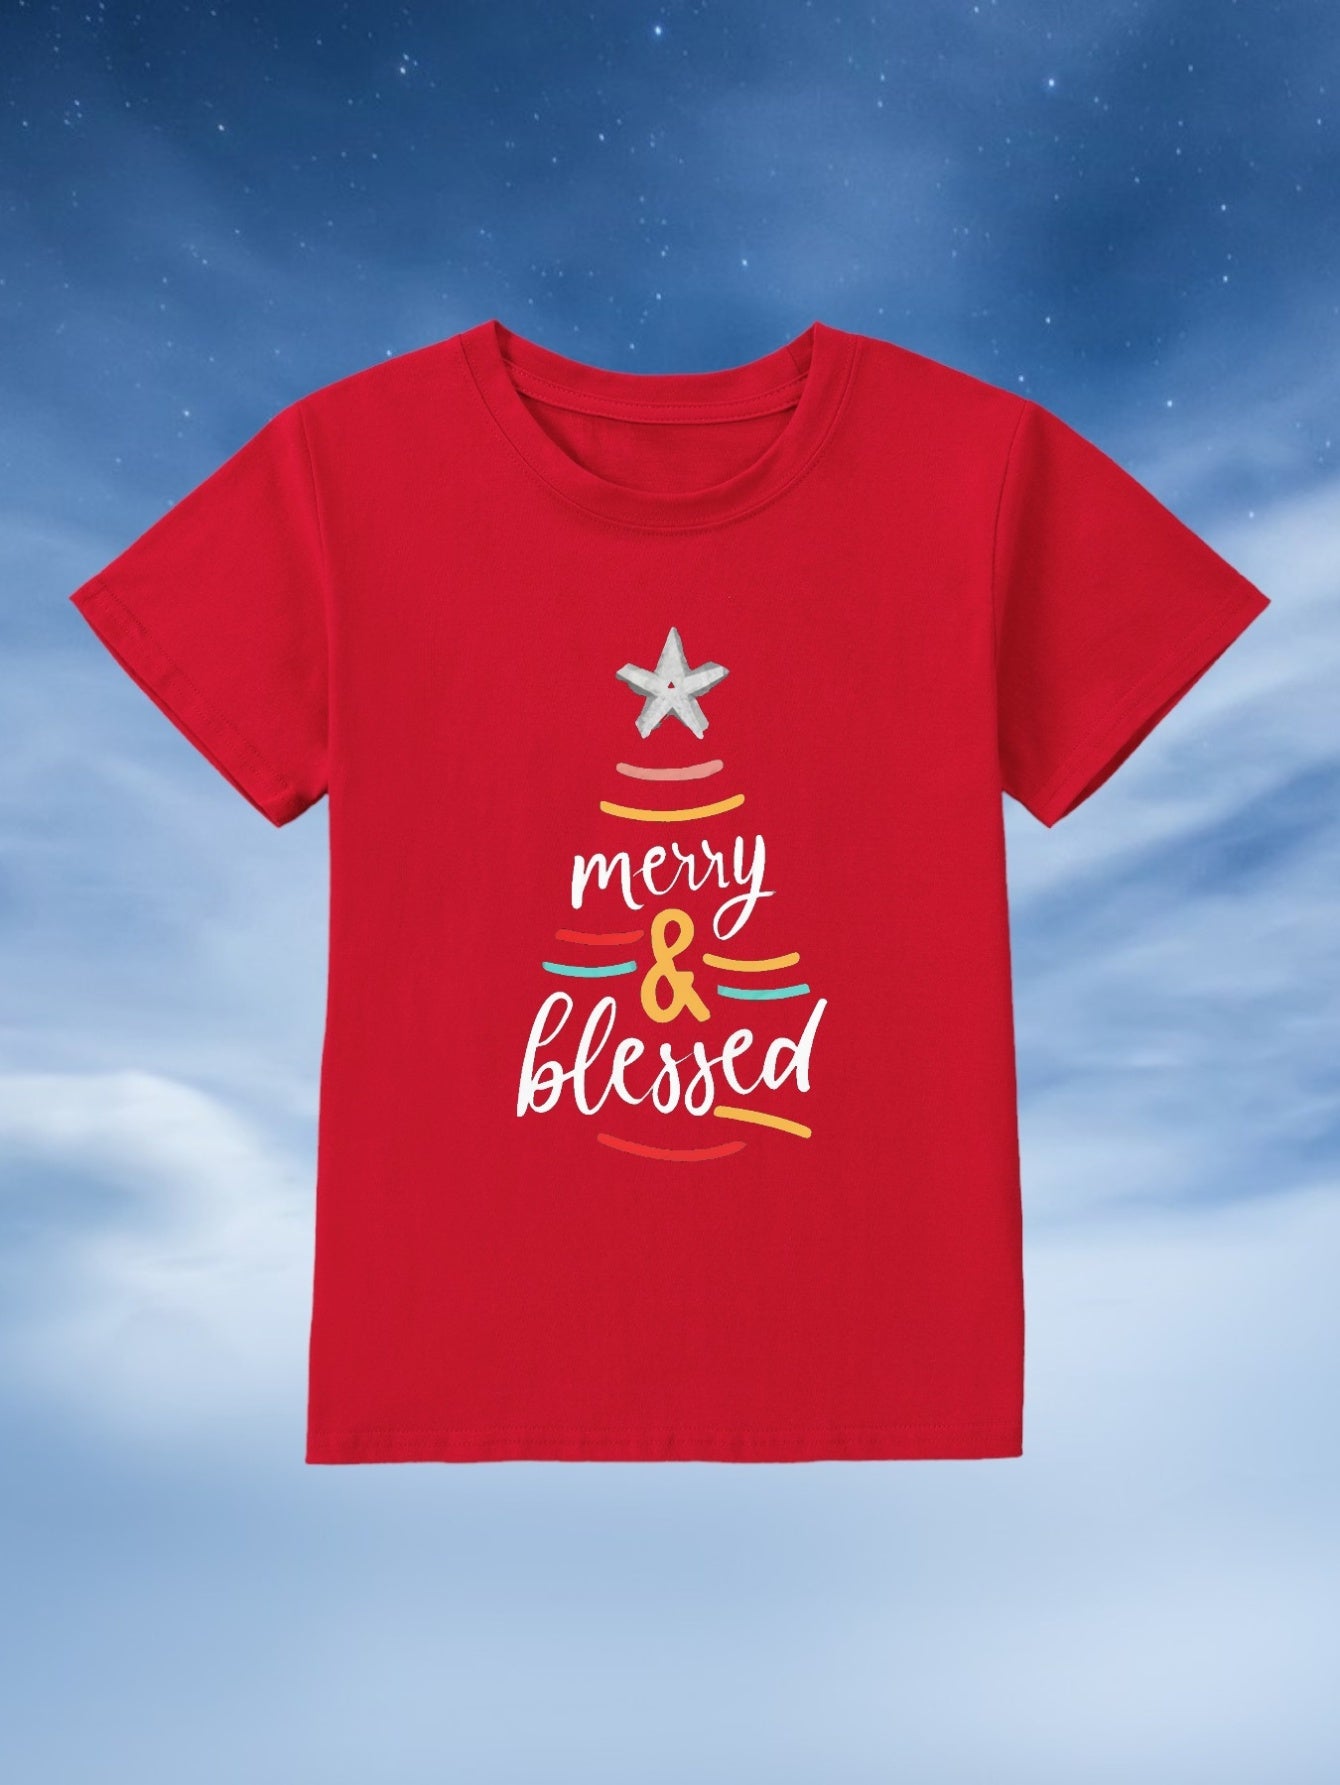 Merry & blessed Christmas Themed Youth Christian T-shirt claimedbygoddesigns